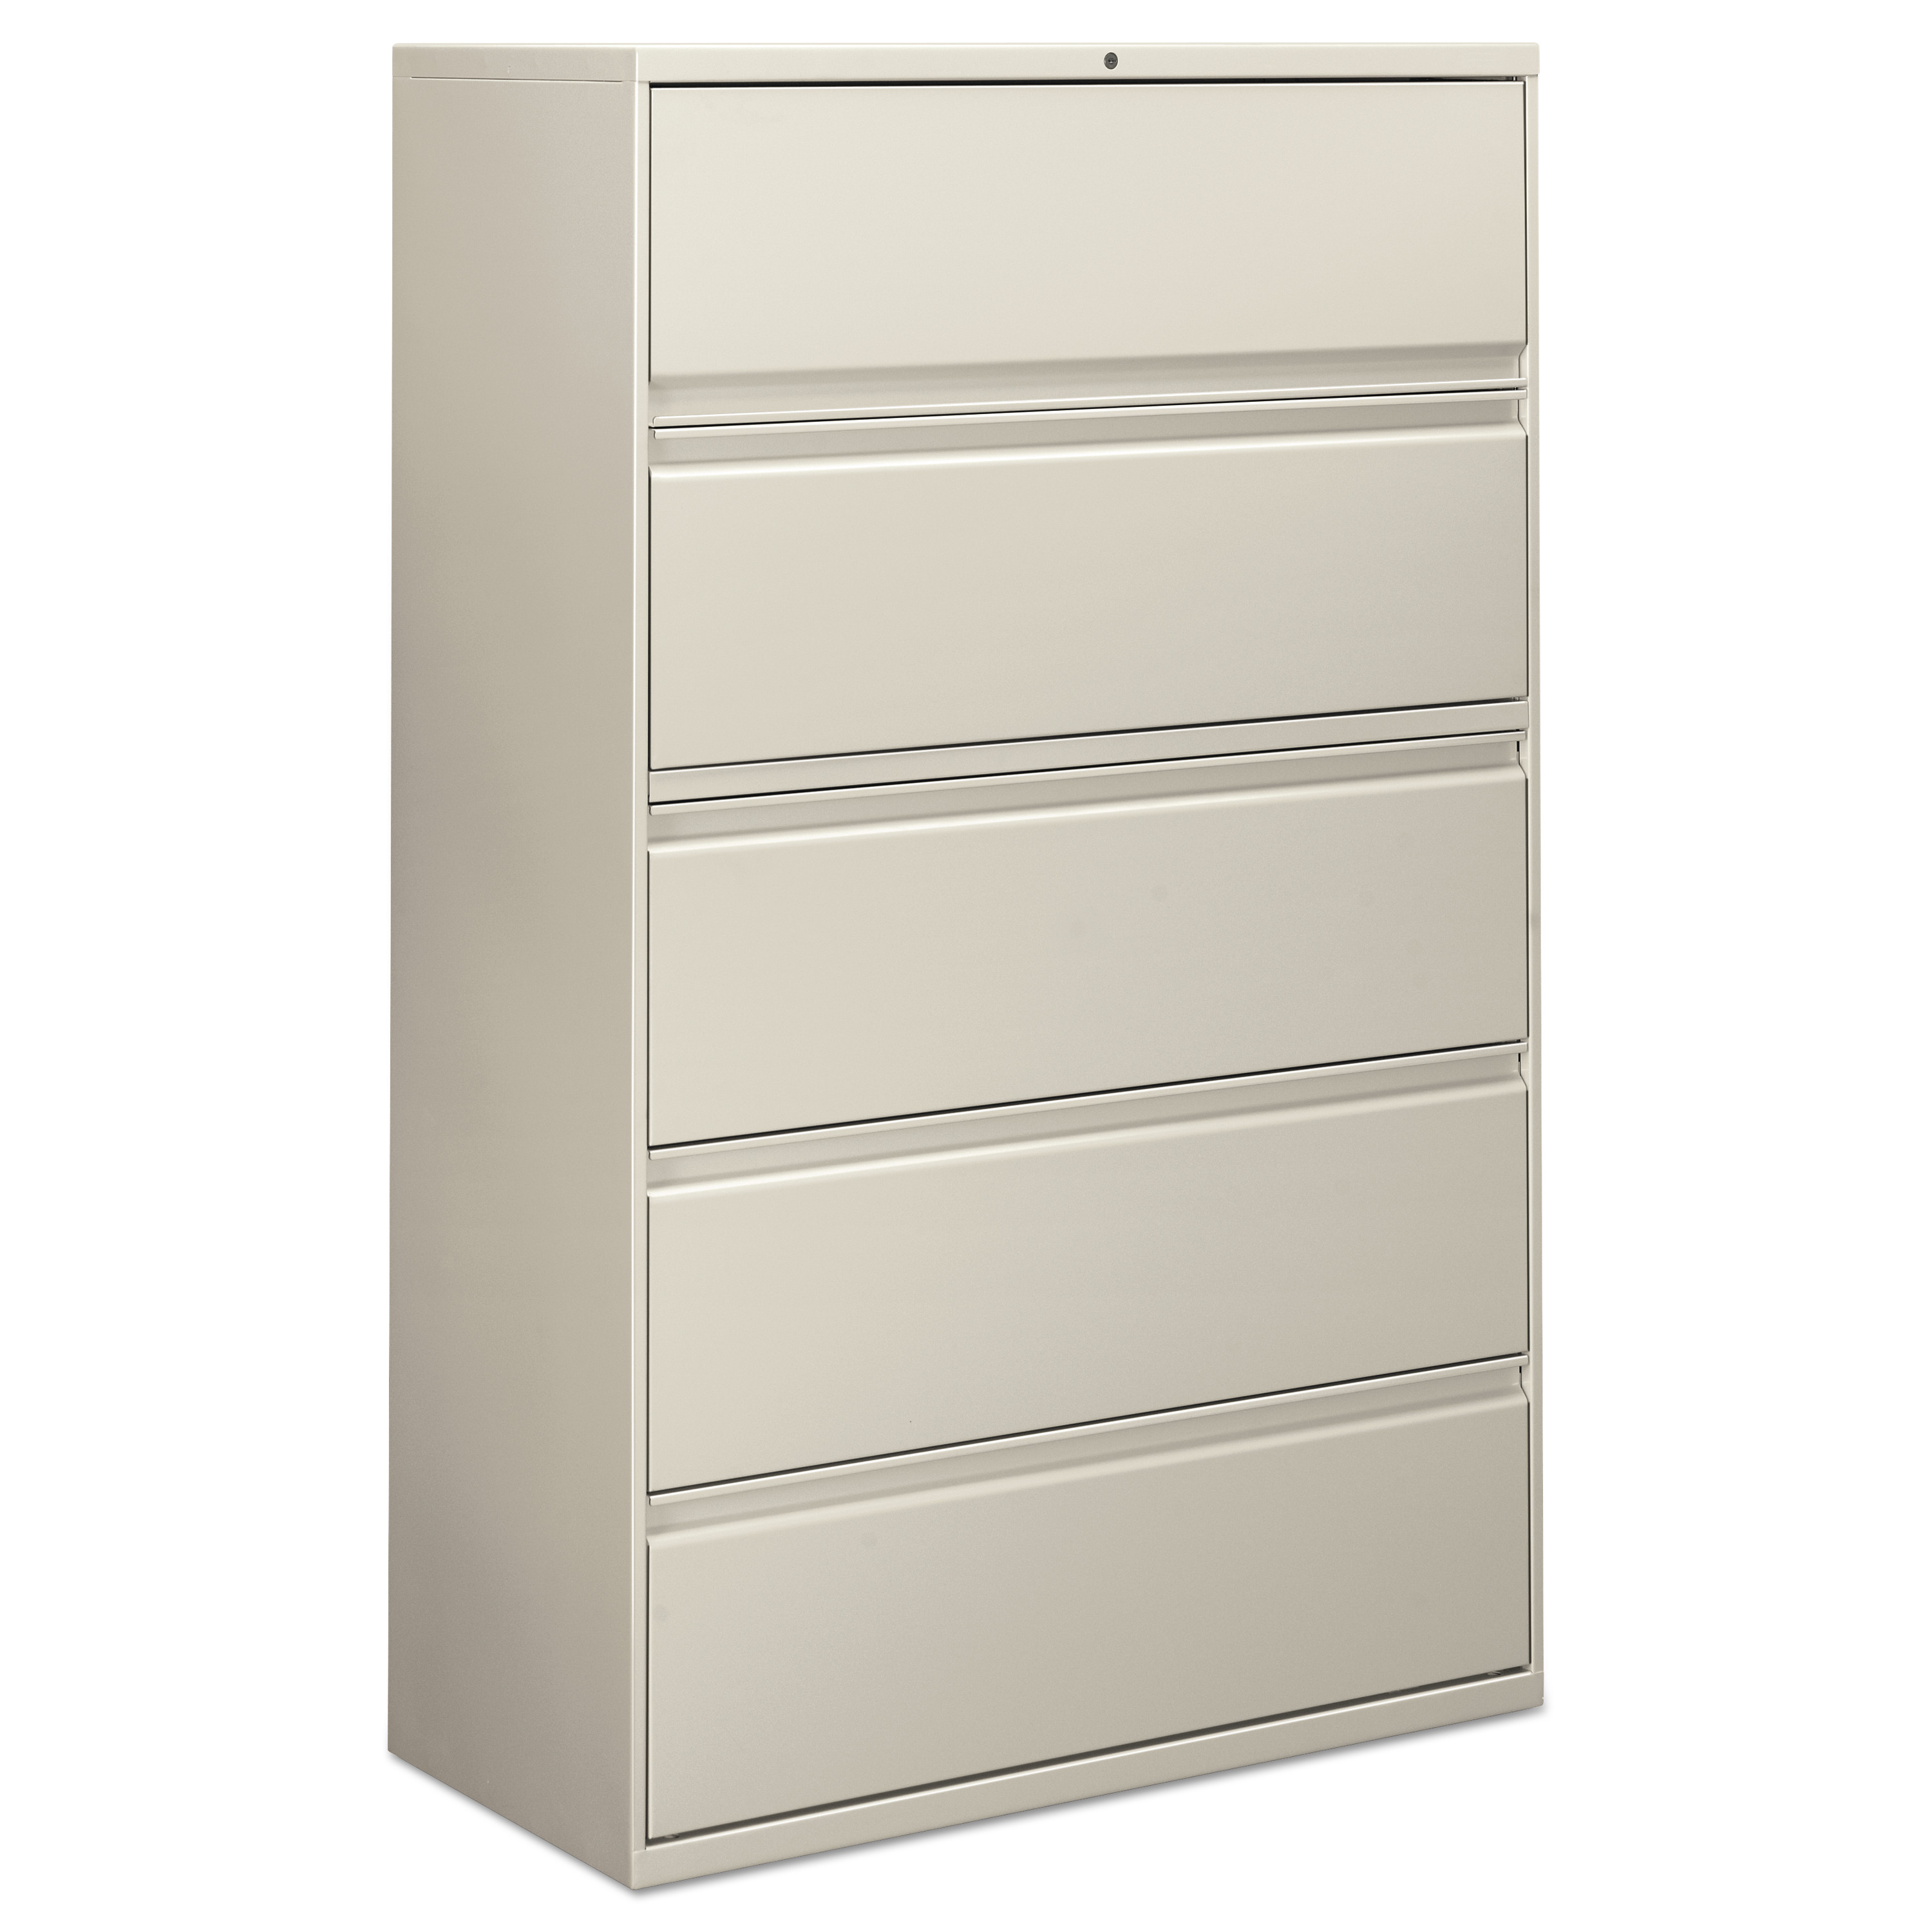 Alera Five-Drawer Lateral File Cabinet, 42w x 18d x 64.25h, Light Gray -ALELF4267LG - image 2 of 2